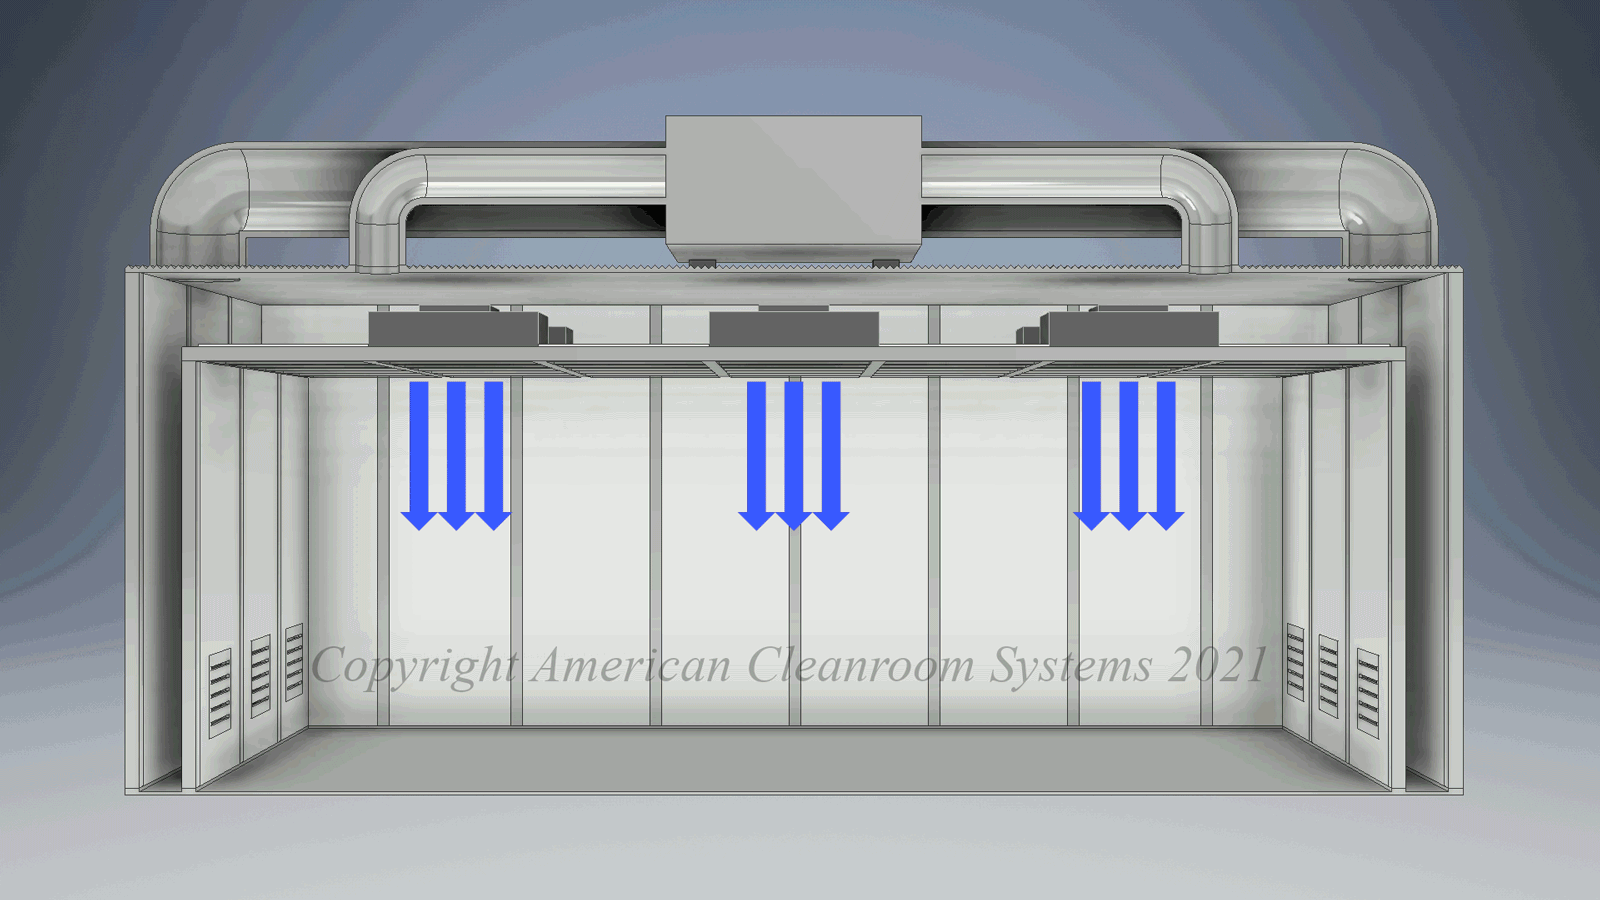 Section view recirculating modular cleanroom, air flows